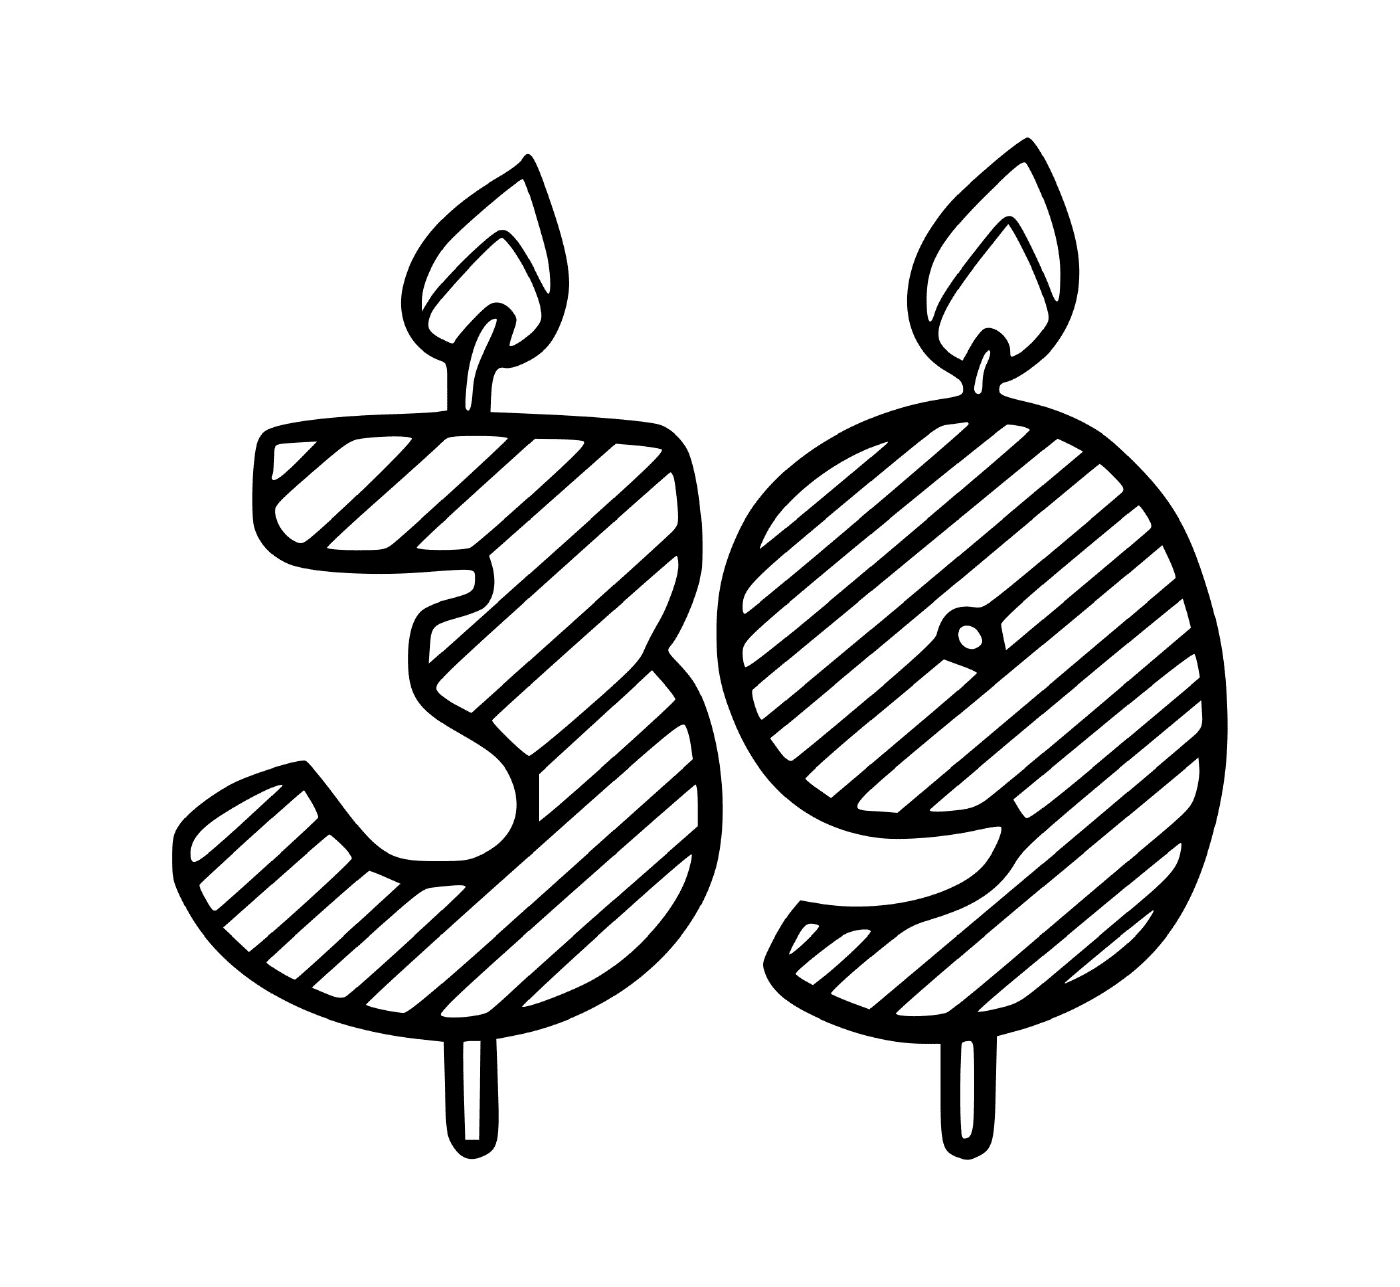  A candle in the shape of the number 3 9 